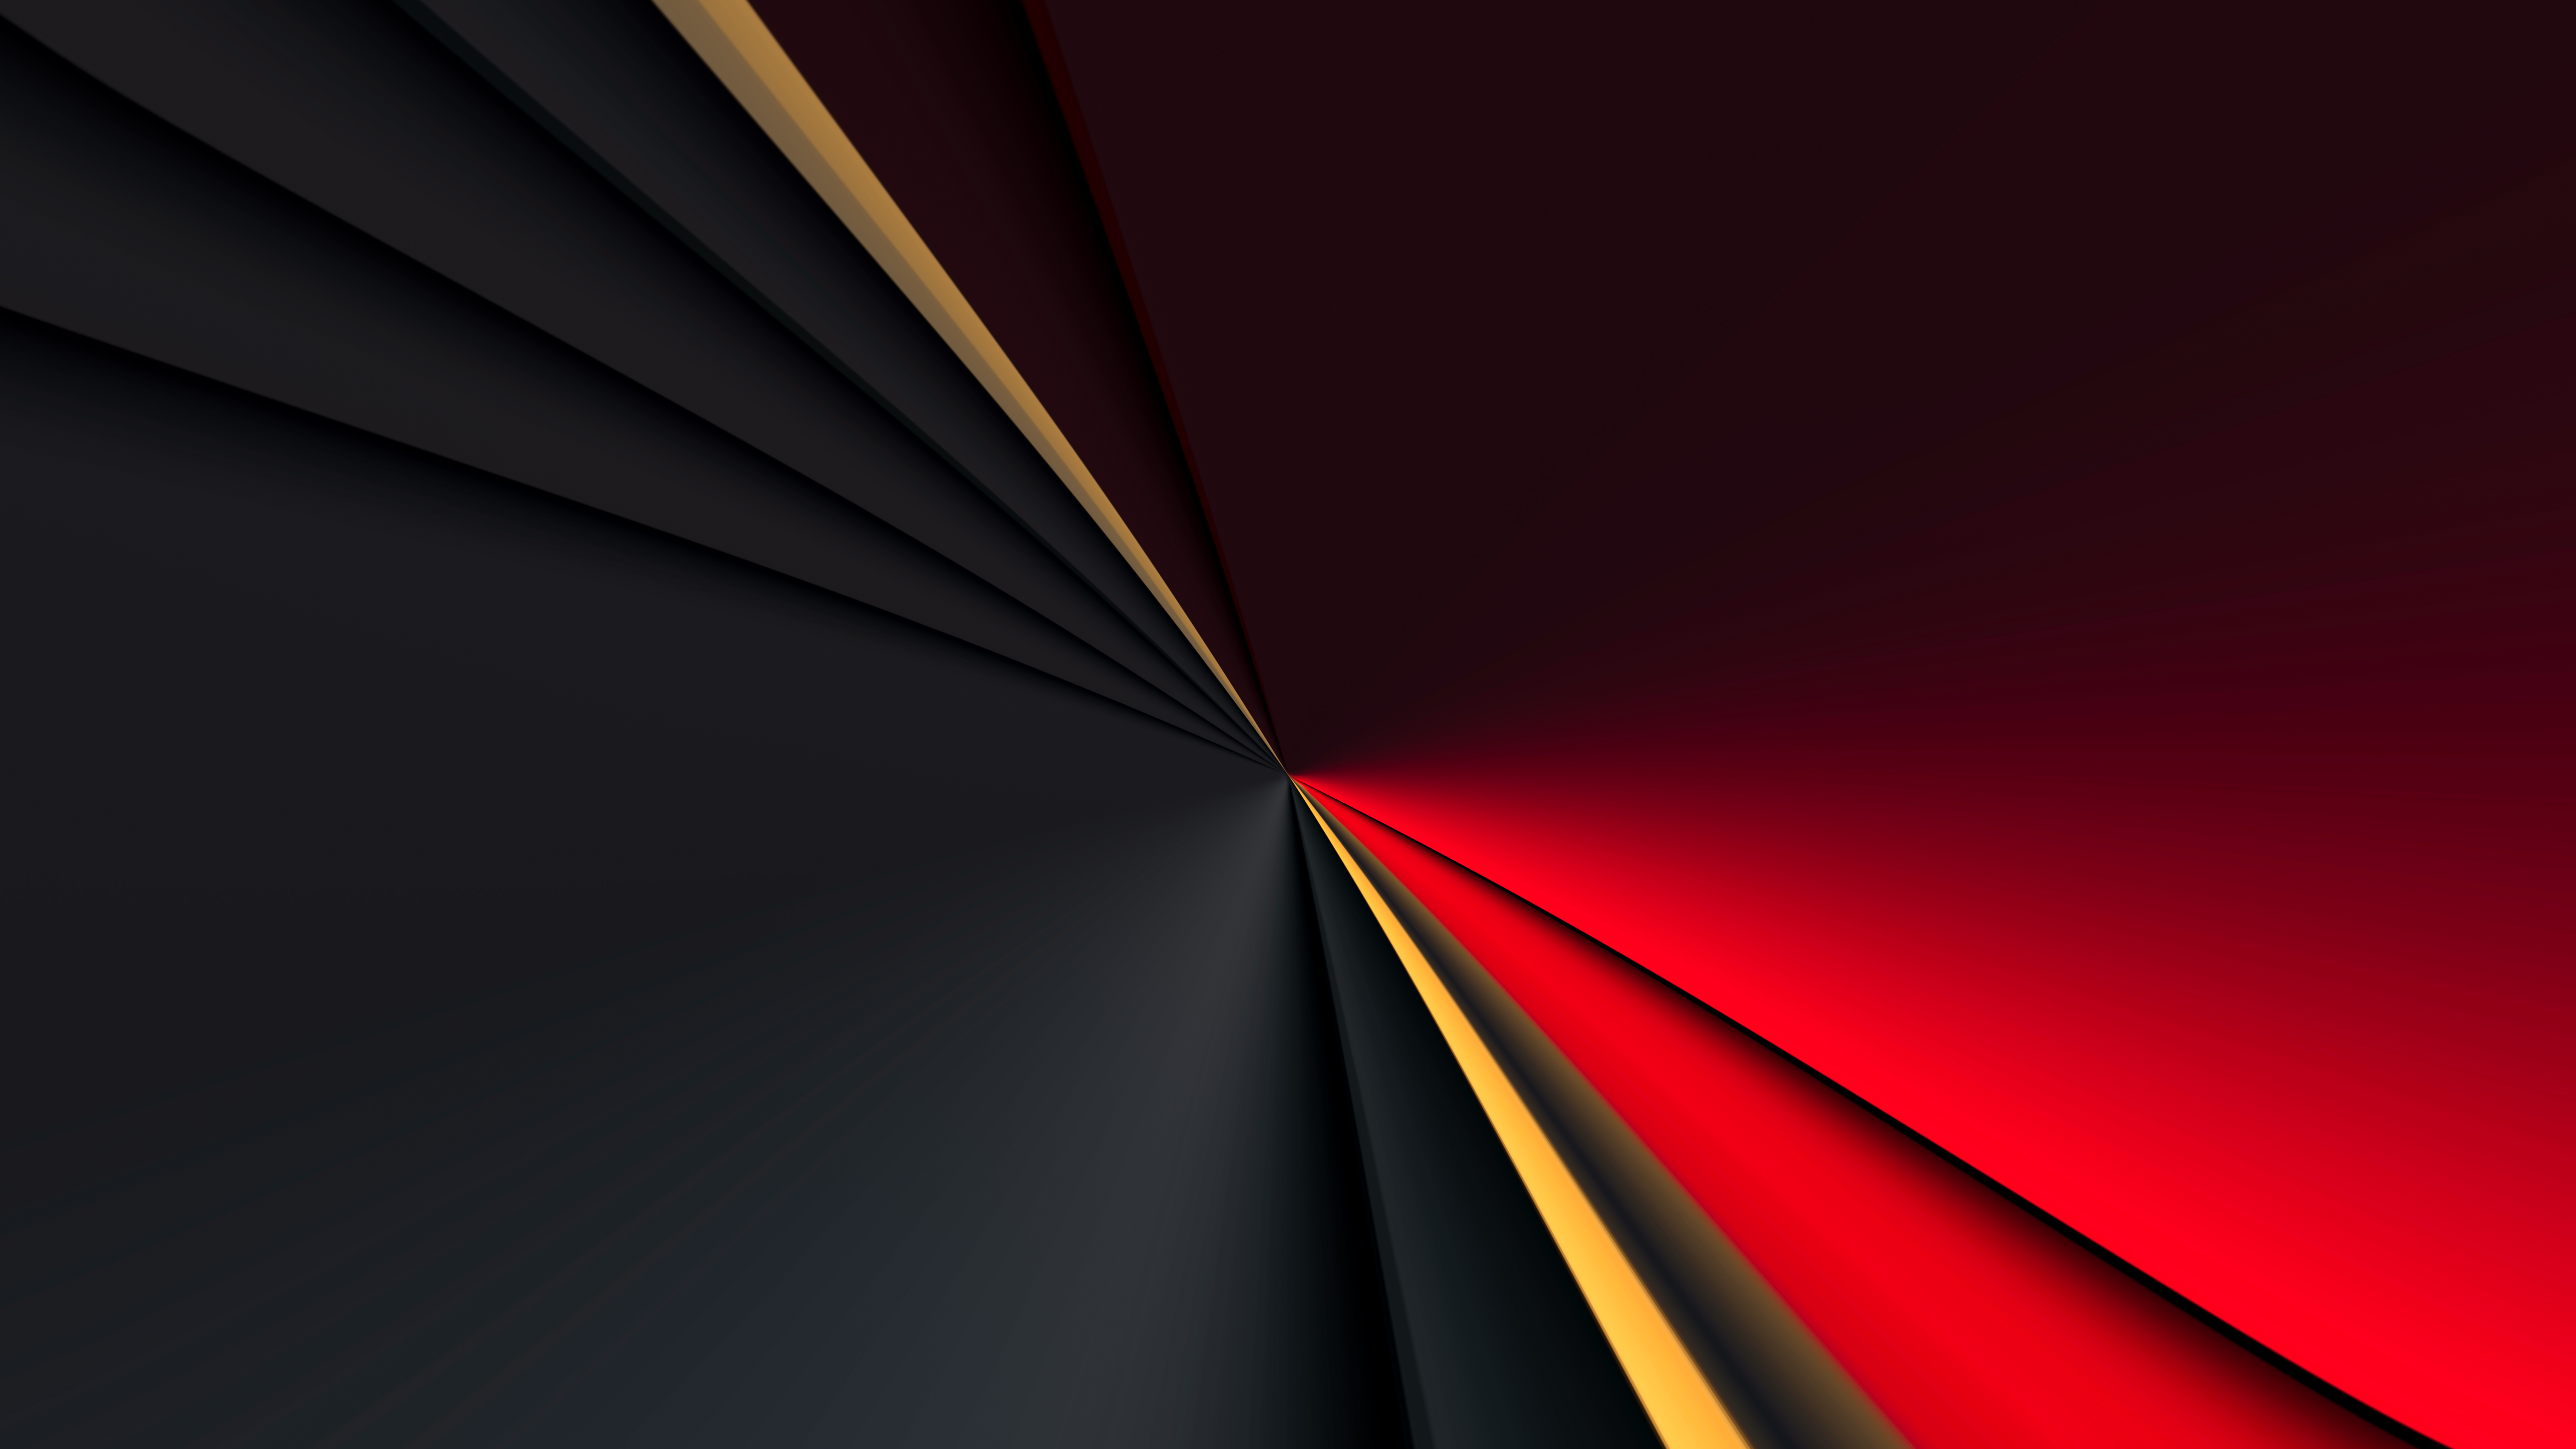 X abstract dark colors pattern k k hd k wallpapers images backgrounds photos and pictures